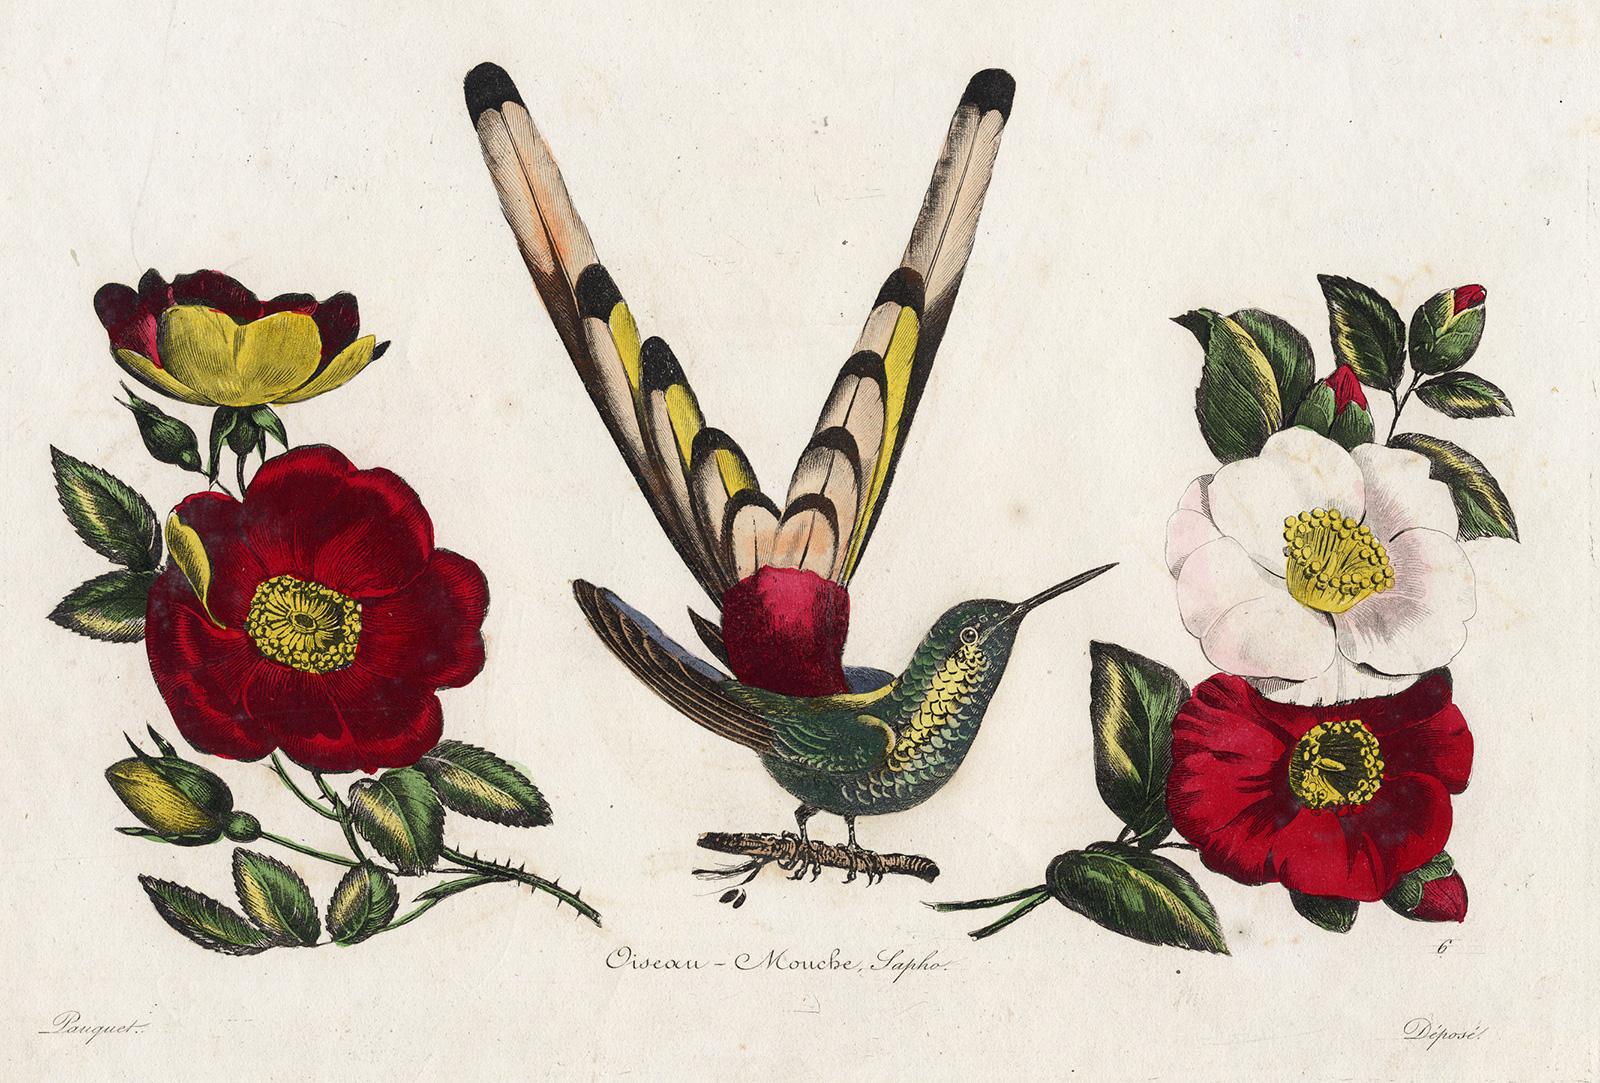 Hippolyte Louis Emile Pauquet and Polydore Pauquet Animal Print - The Saphire Mouthed Hummingbird by Pauquet - Hand coloured engraving - 19th c